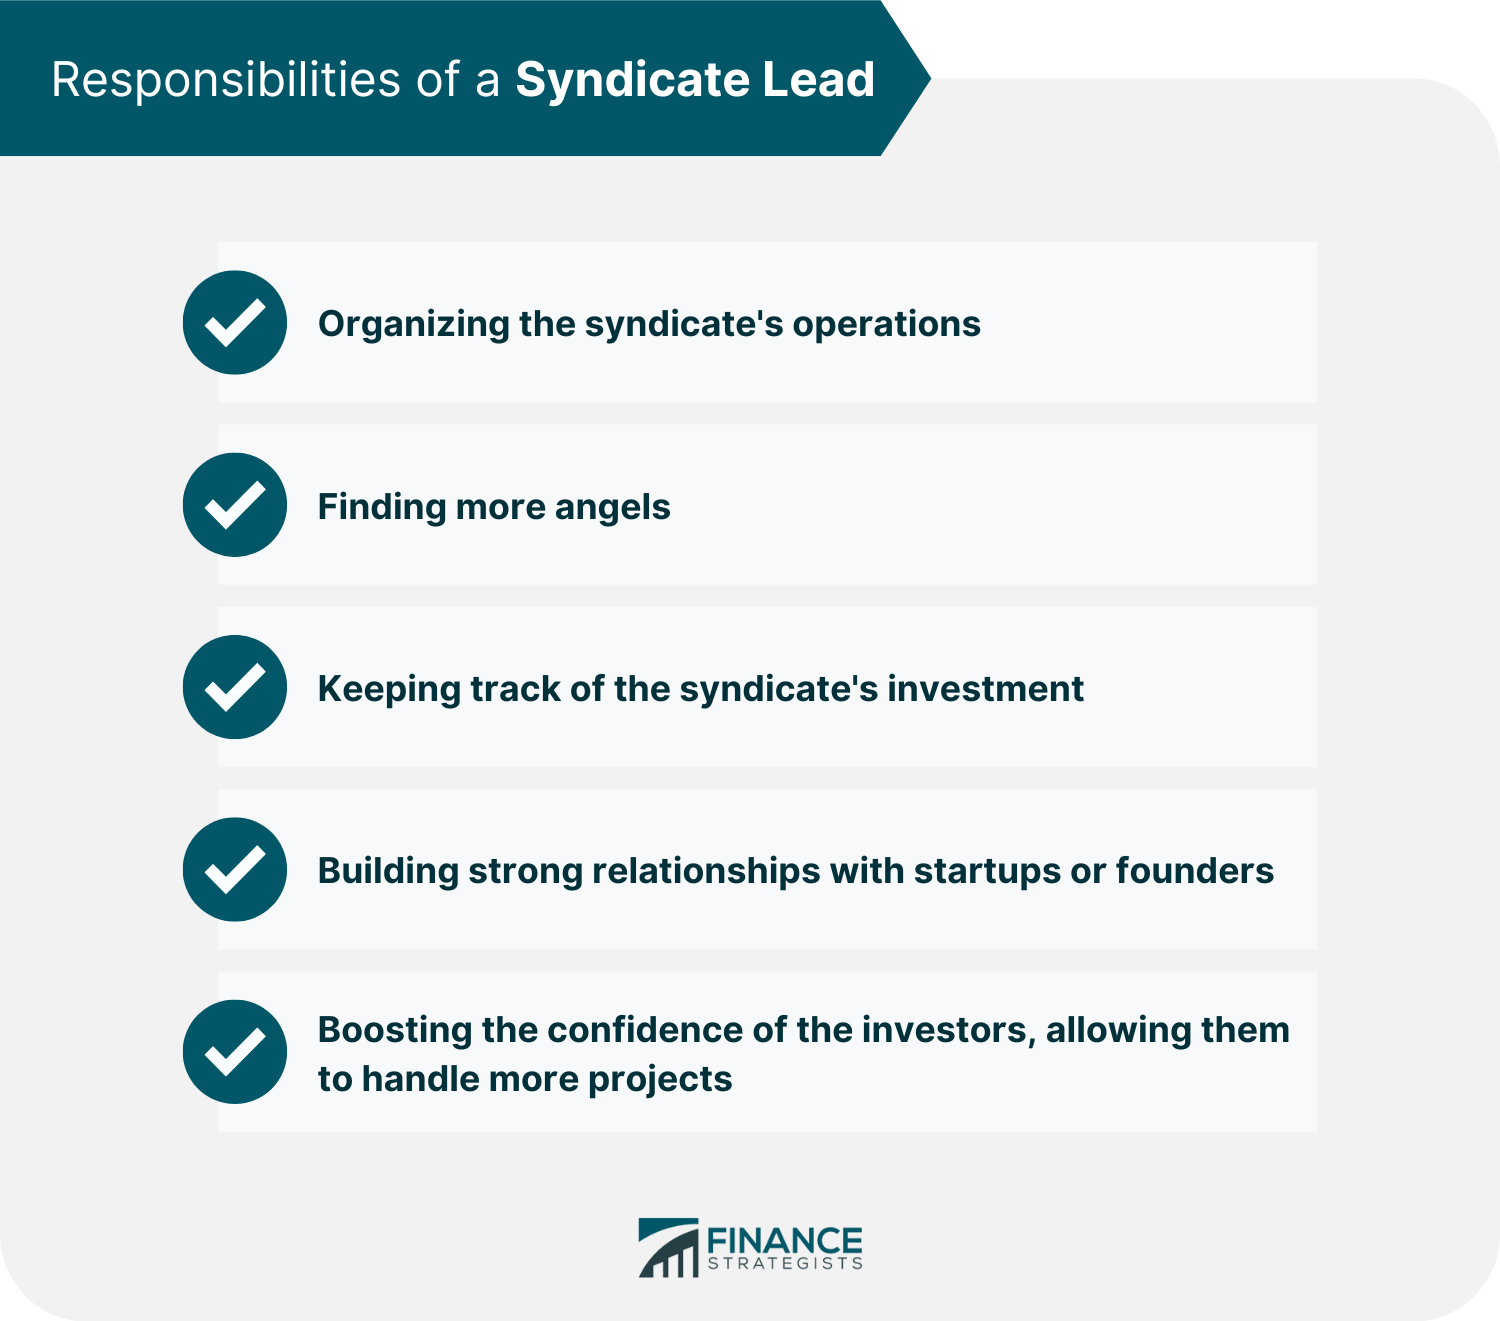 Responsibilities of a Syndicate Lead